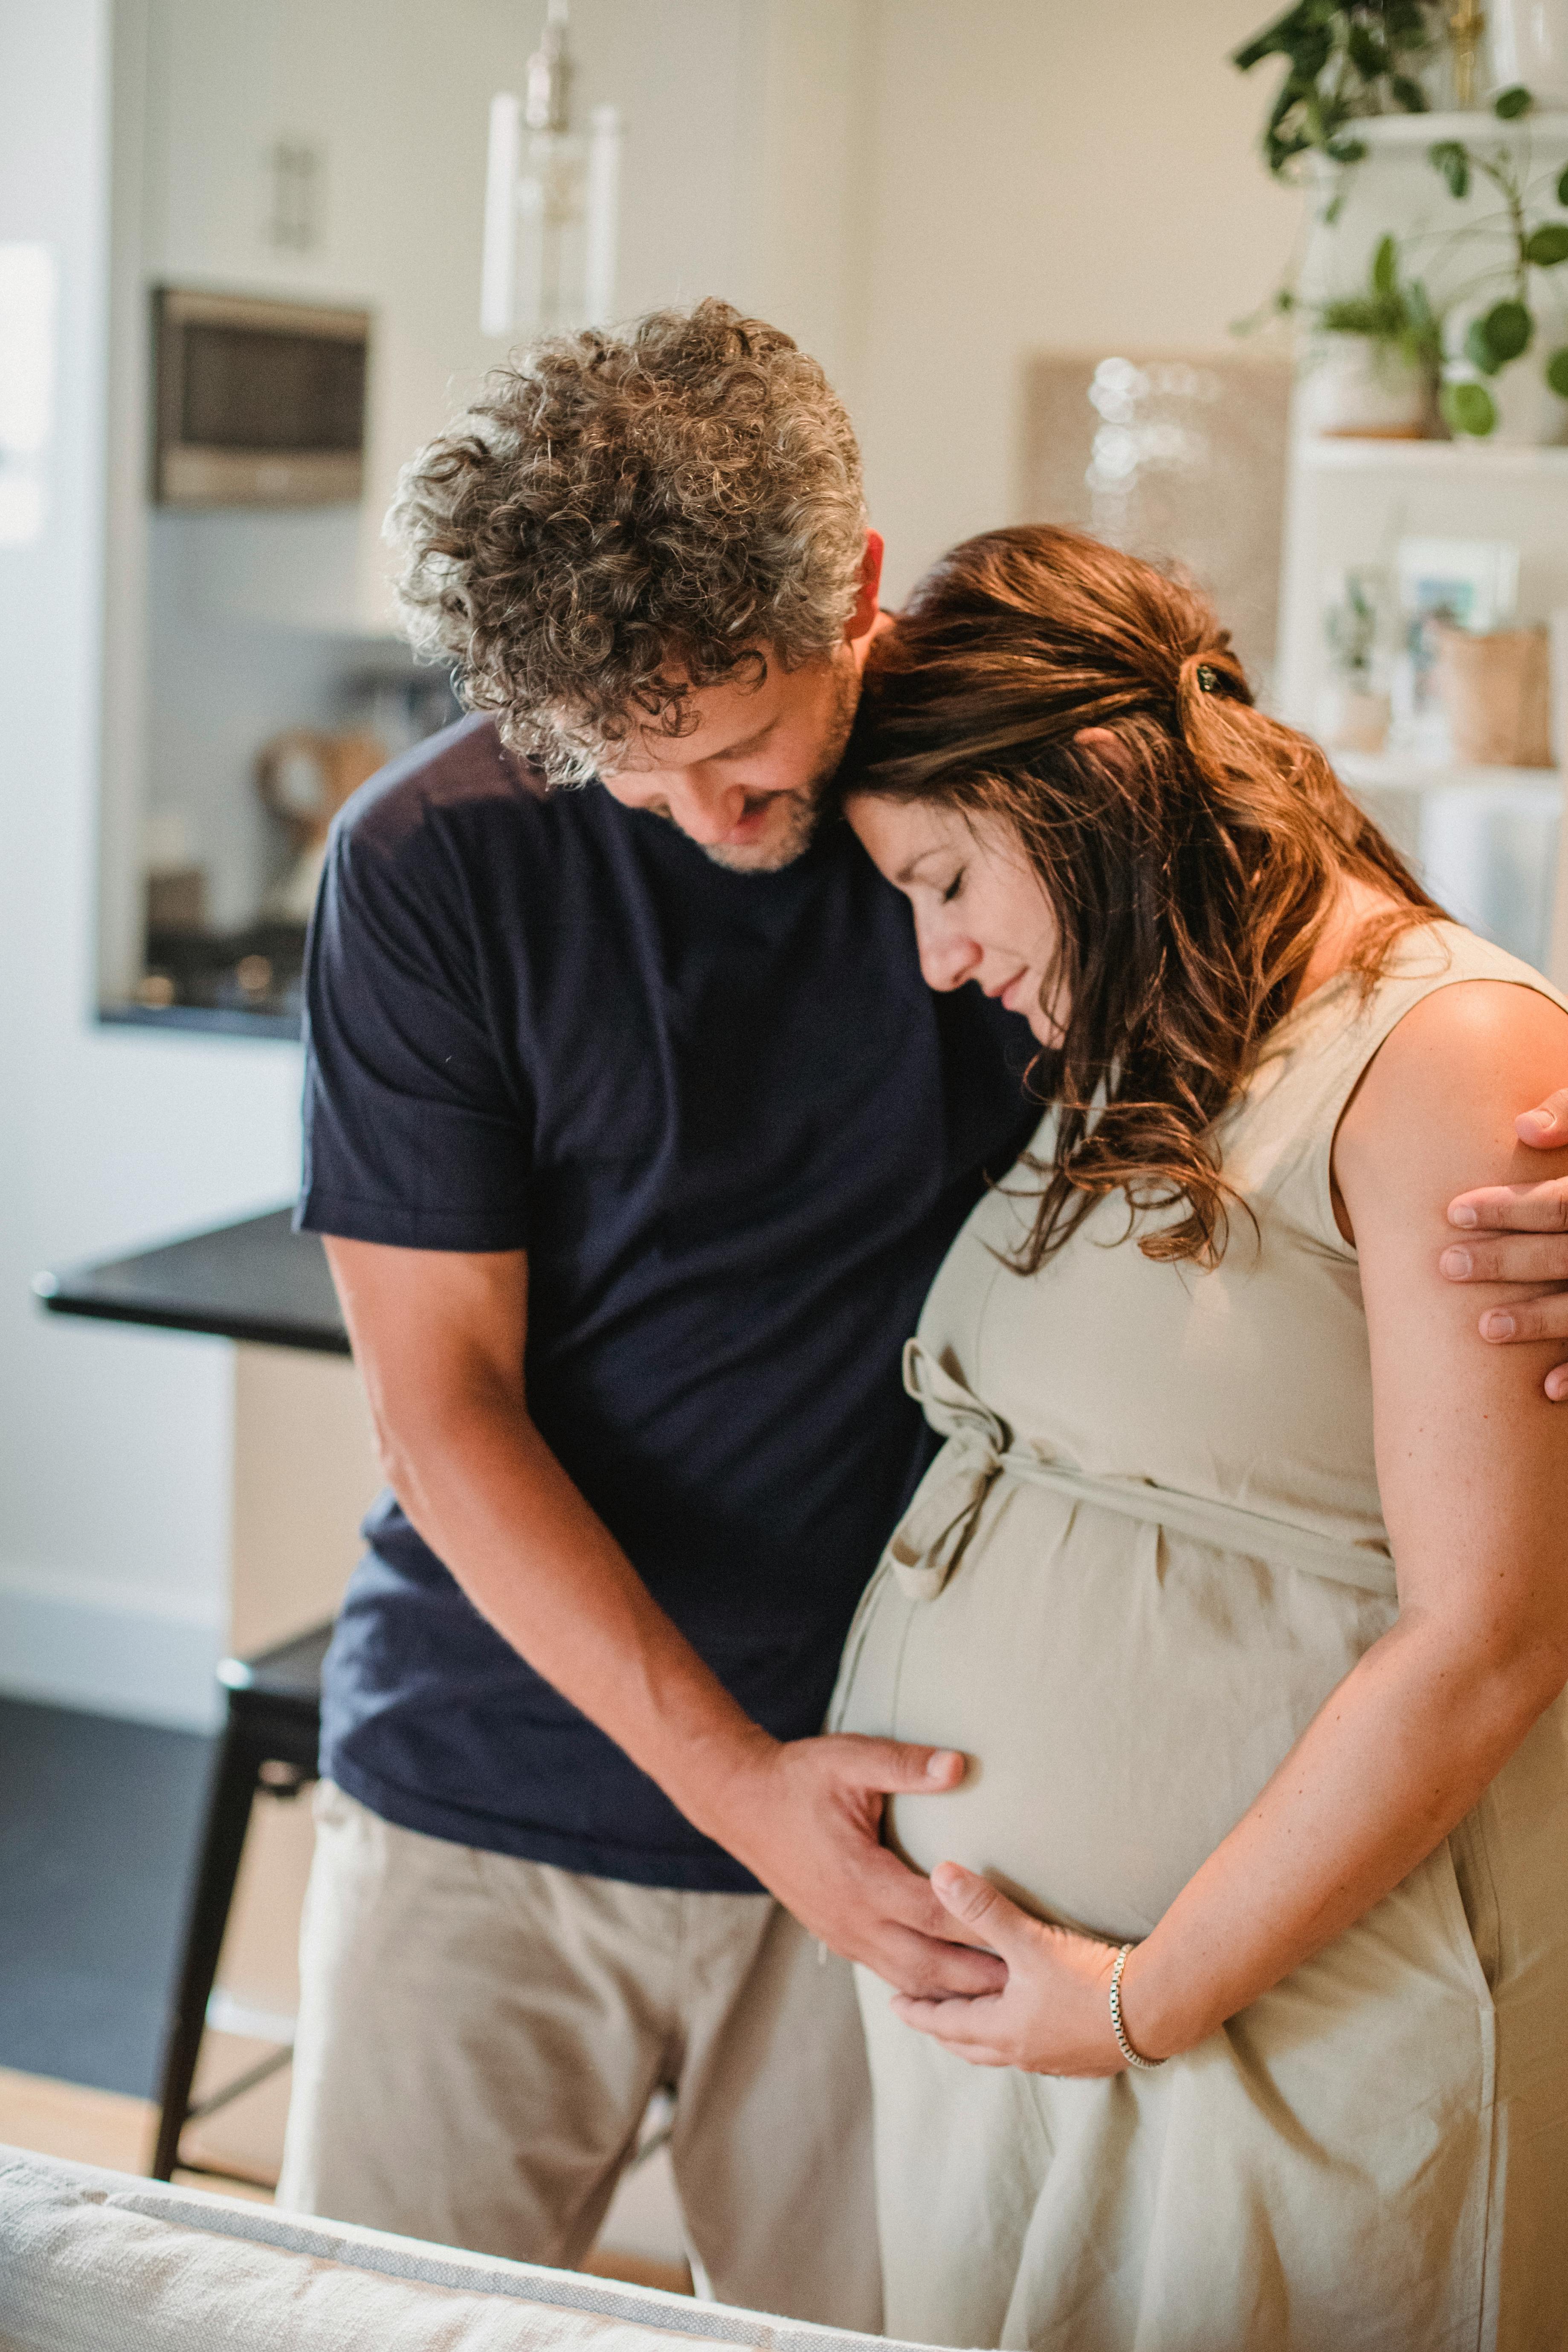 A man comforting and hugging a pregnant woman | Source: Pexels